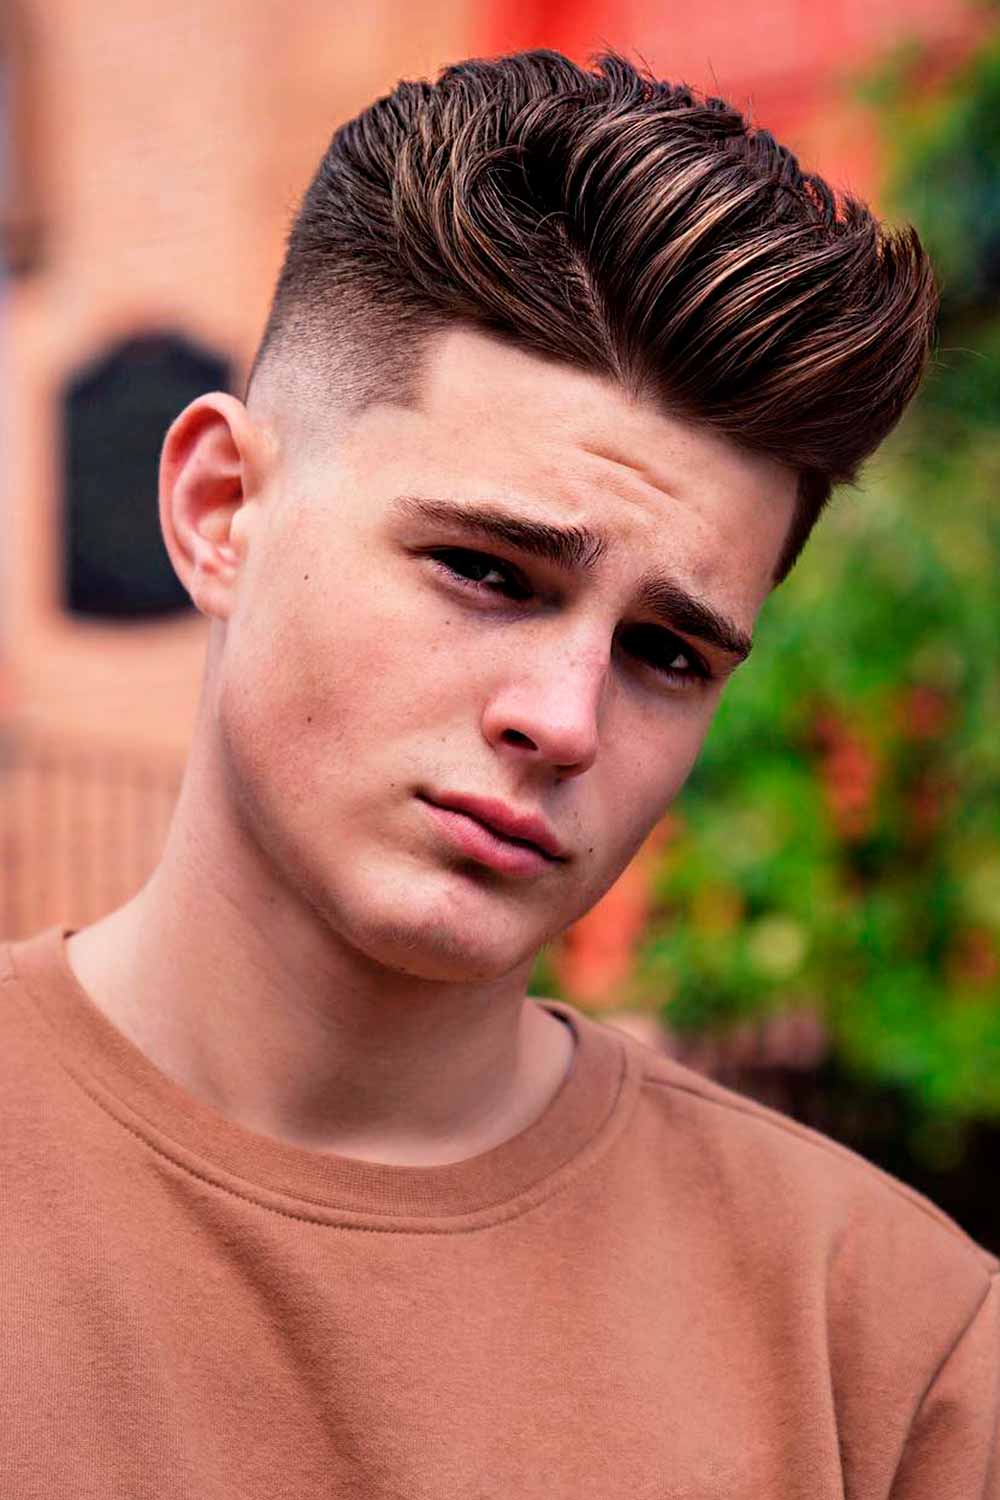 Messy Modern Teenage Guy Haircut With Parting #teenboyhaircuts #teenshaircuts #haircutsforteenageboy